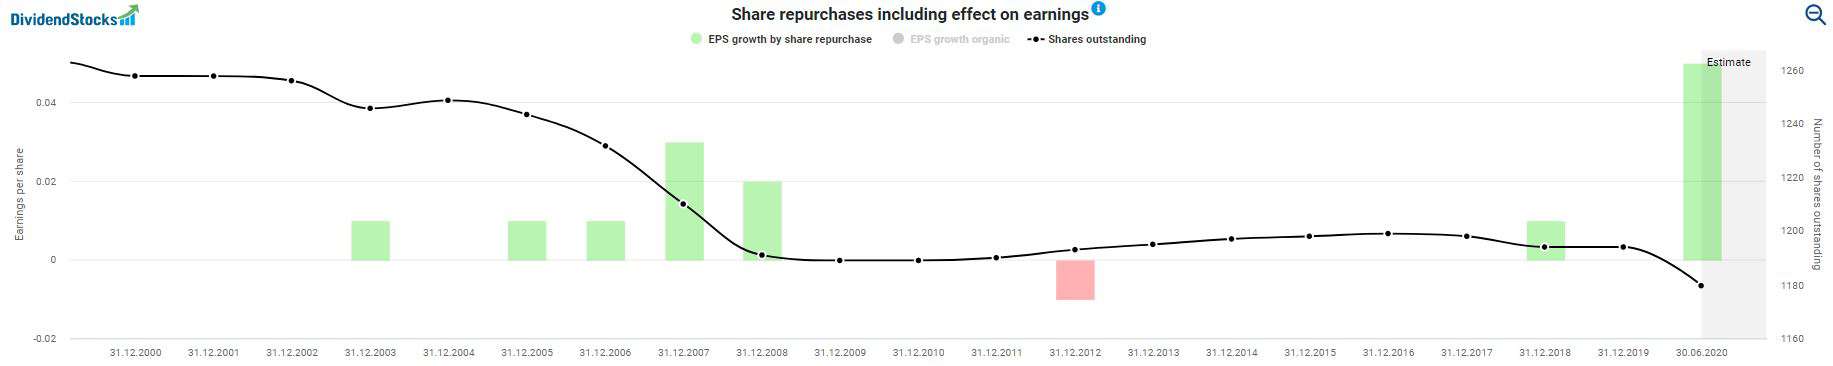 Share repurchases including effect on earnings of the SAP stock